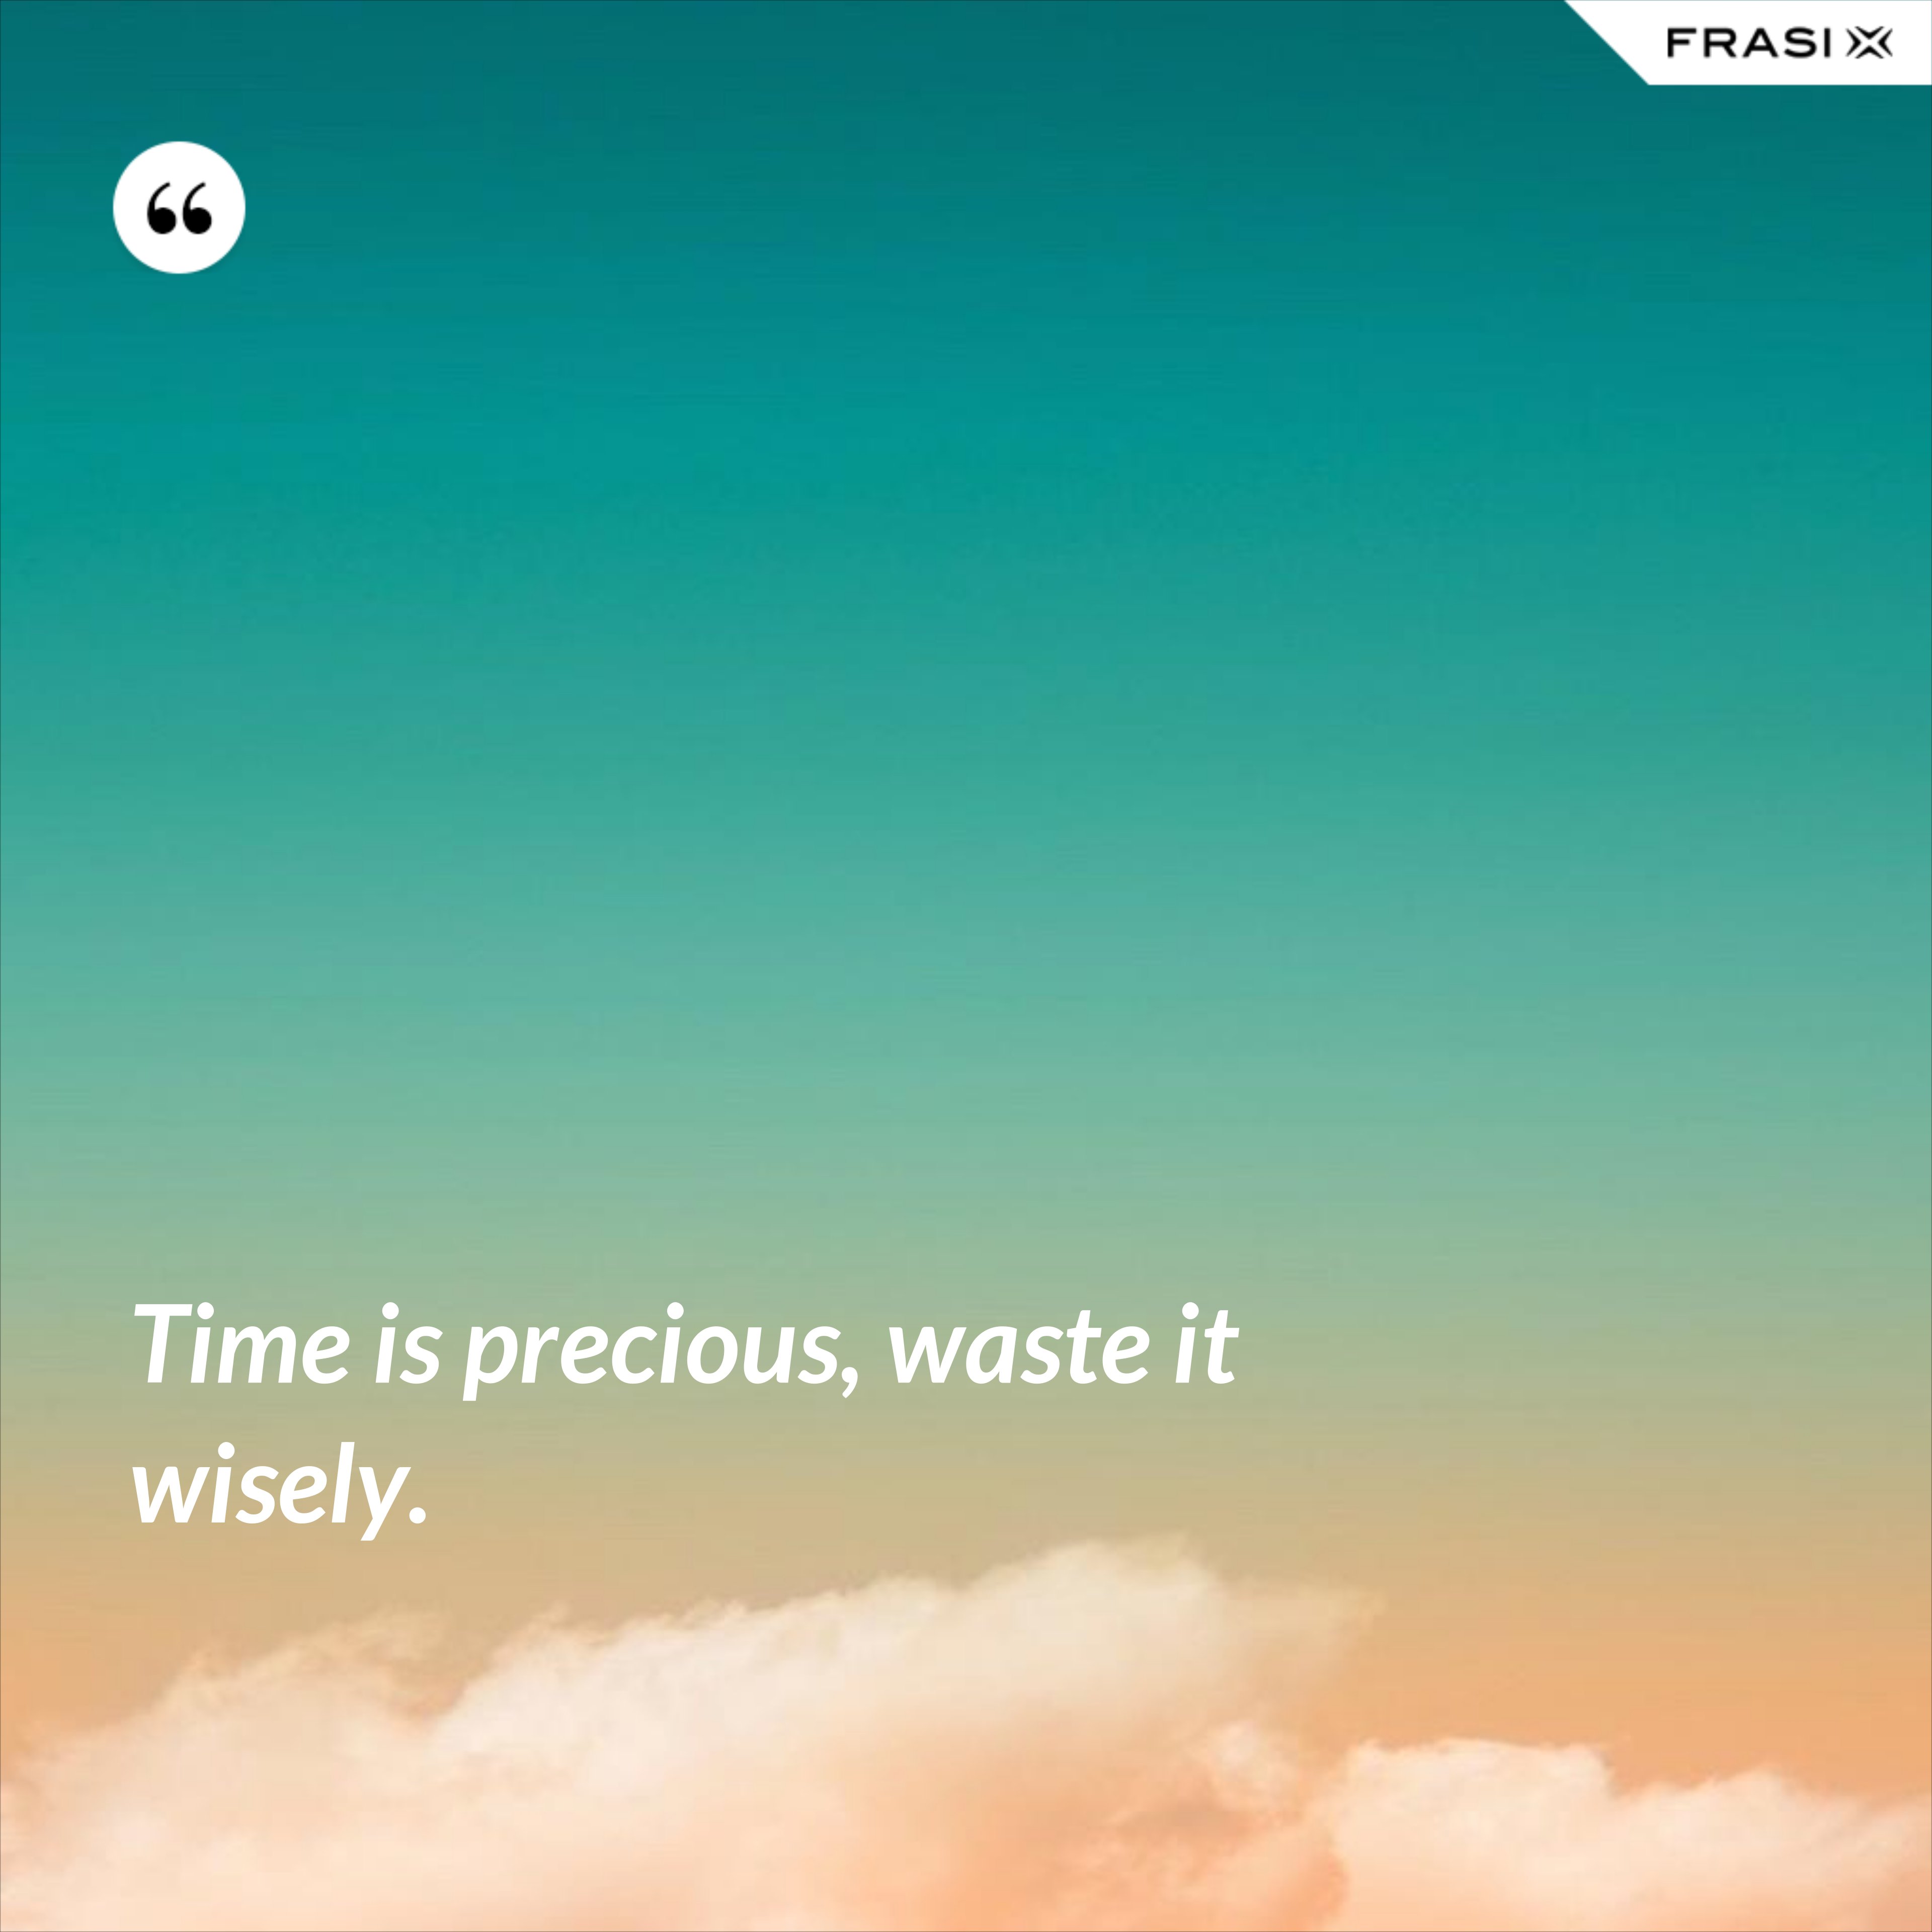 Time is precious, waste it wisely. - Anonimo